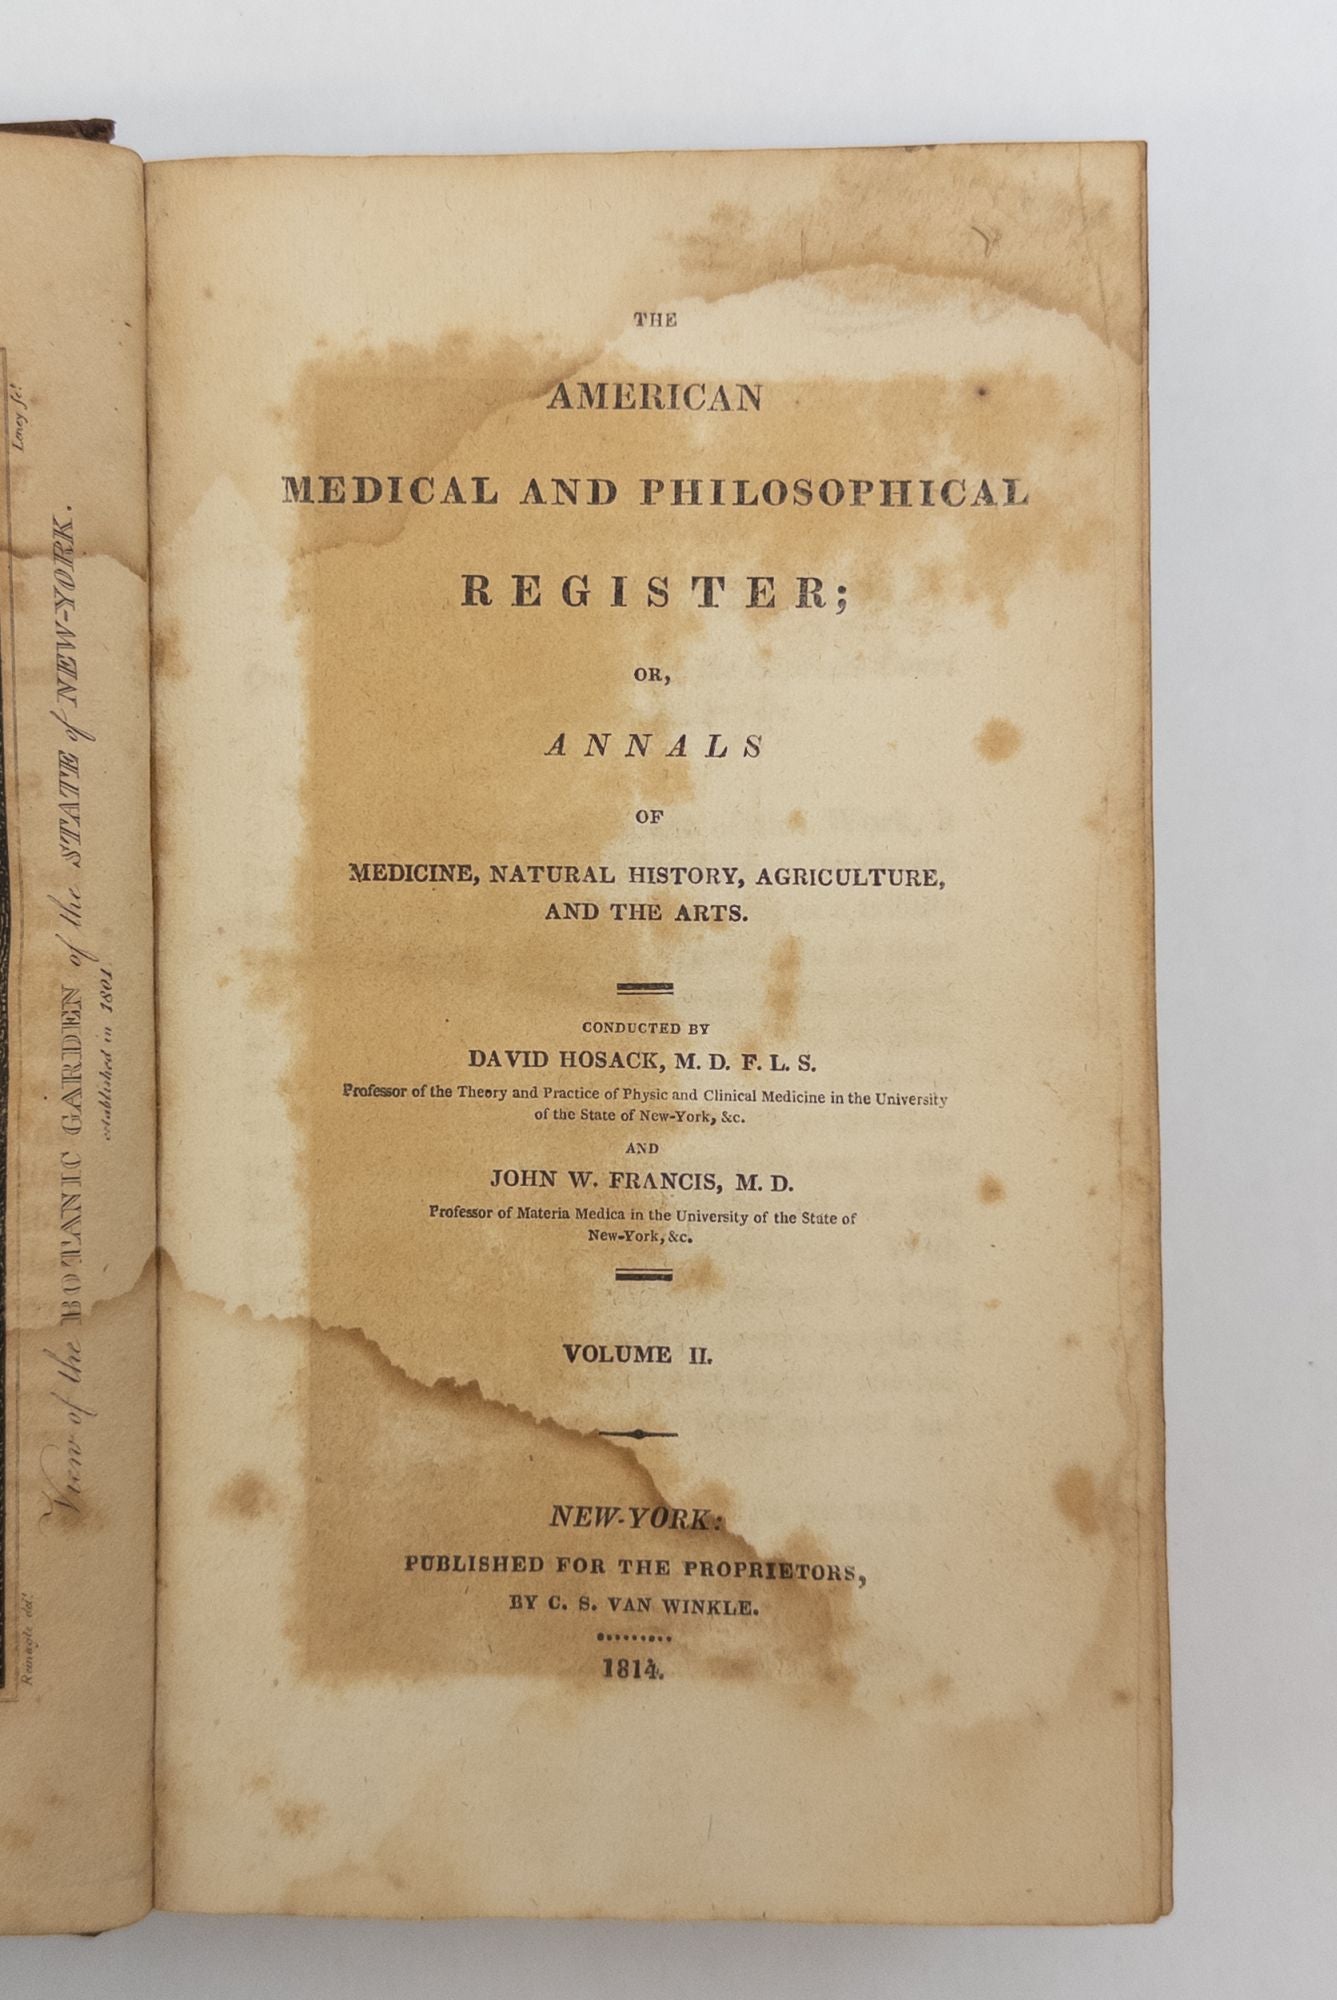 Product Image for THE AMERICAN MEDICAL AND PHYSICAL REGISTER; OR, ANNALS OF MEDICINE, NATURAL HISTORY, AGRICULTURE, AND THE ARTS [Volumes Two and Three, Only]